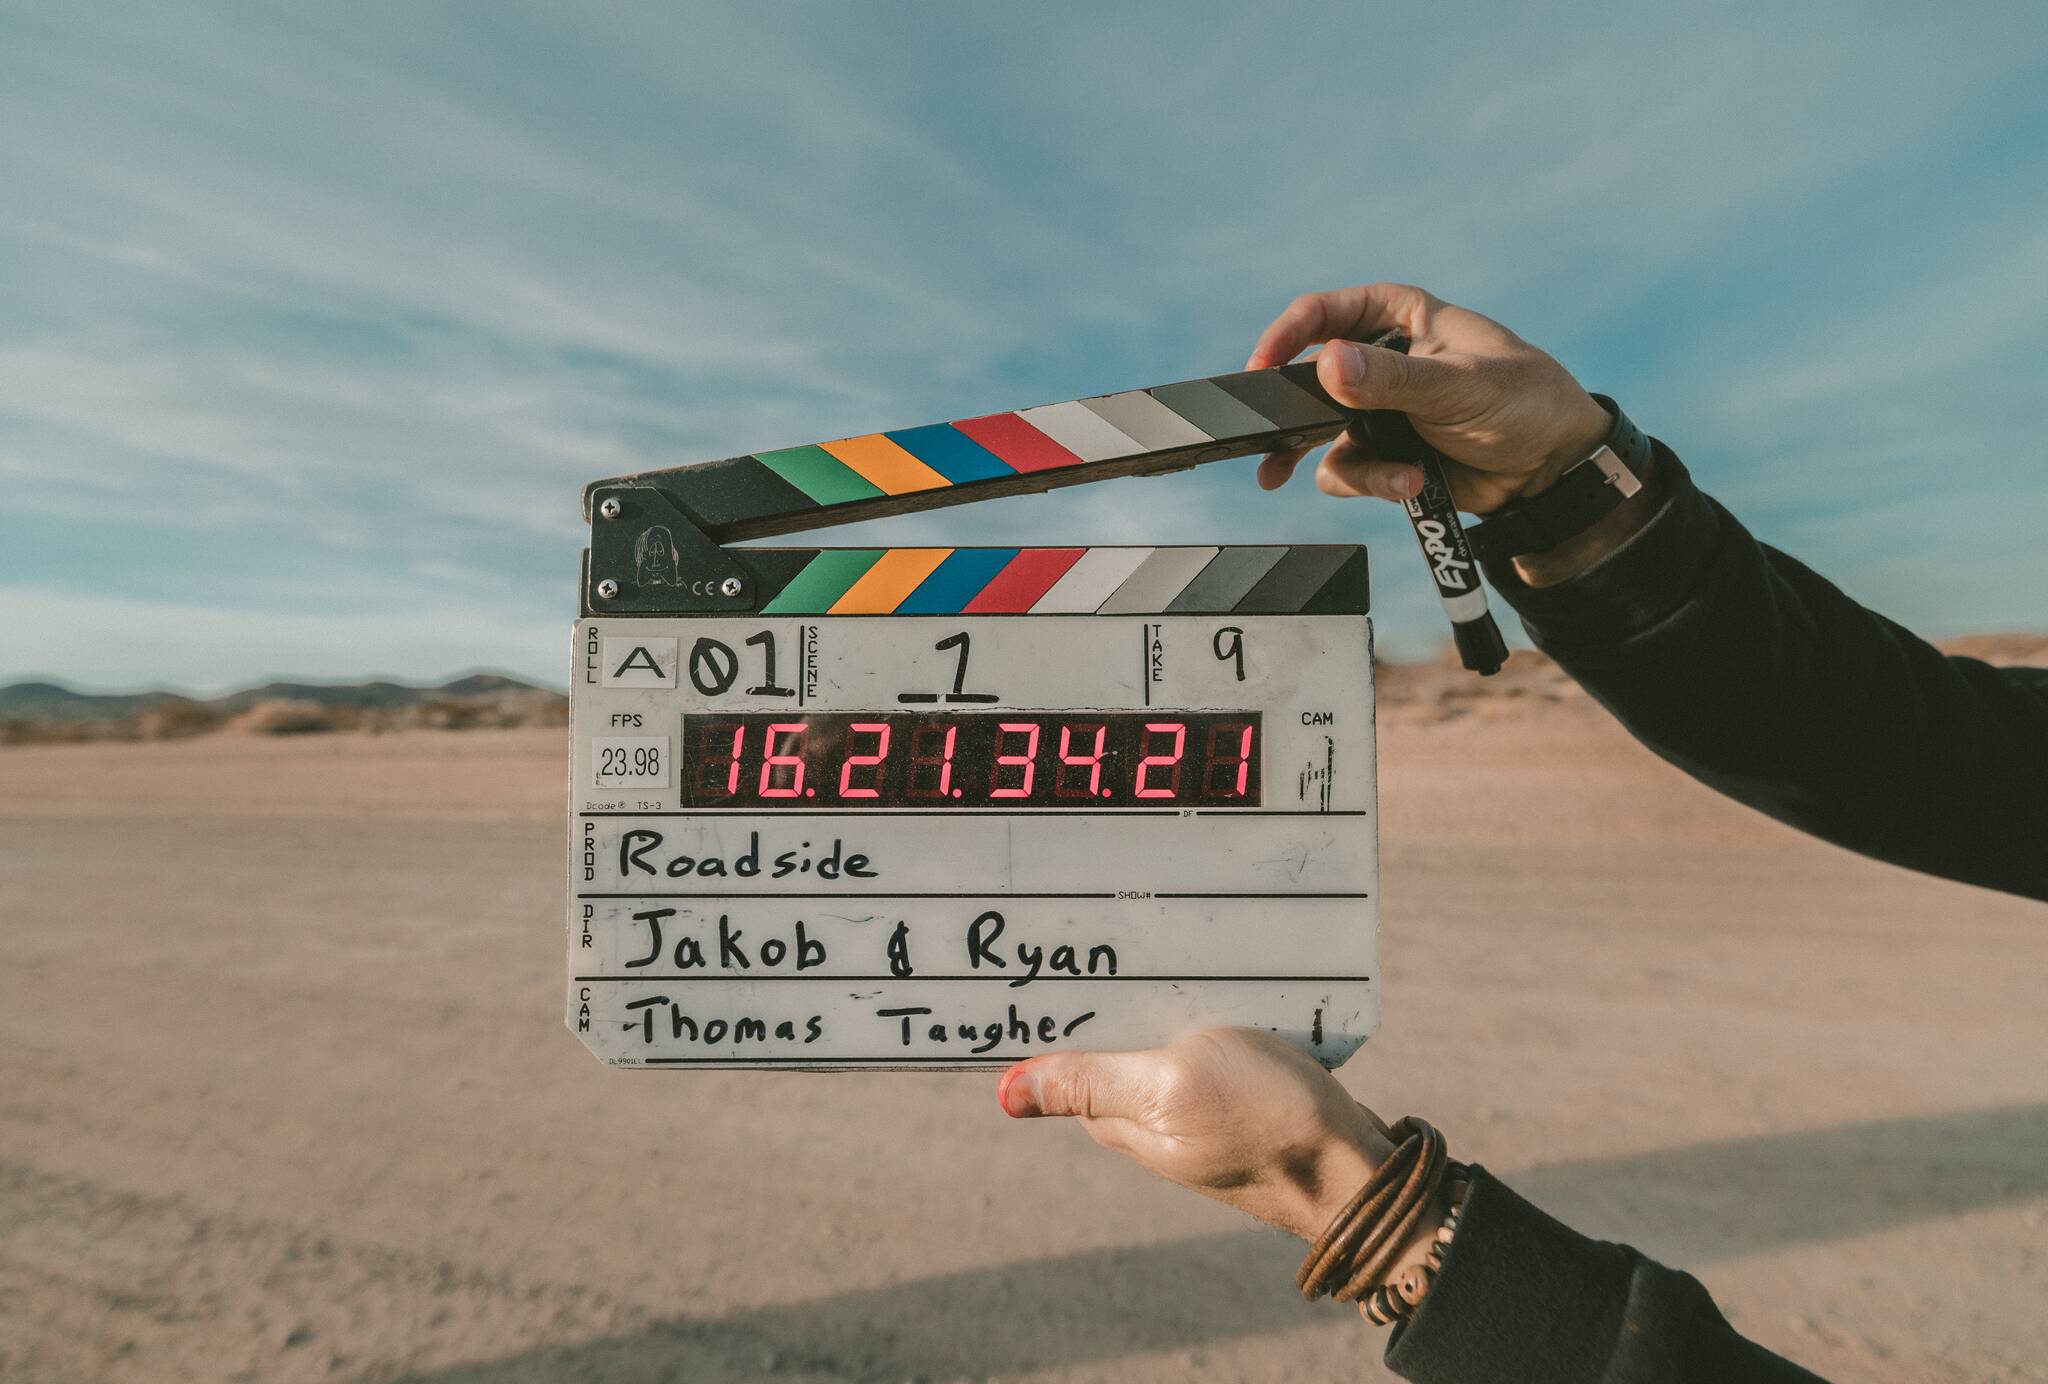 A modern clapperboard with a digital time display being hand-held in desert location